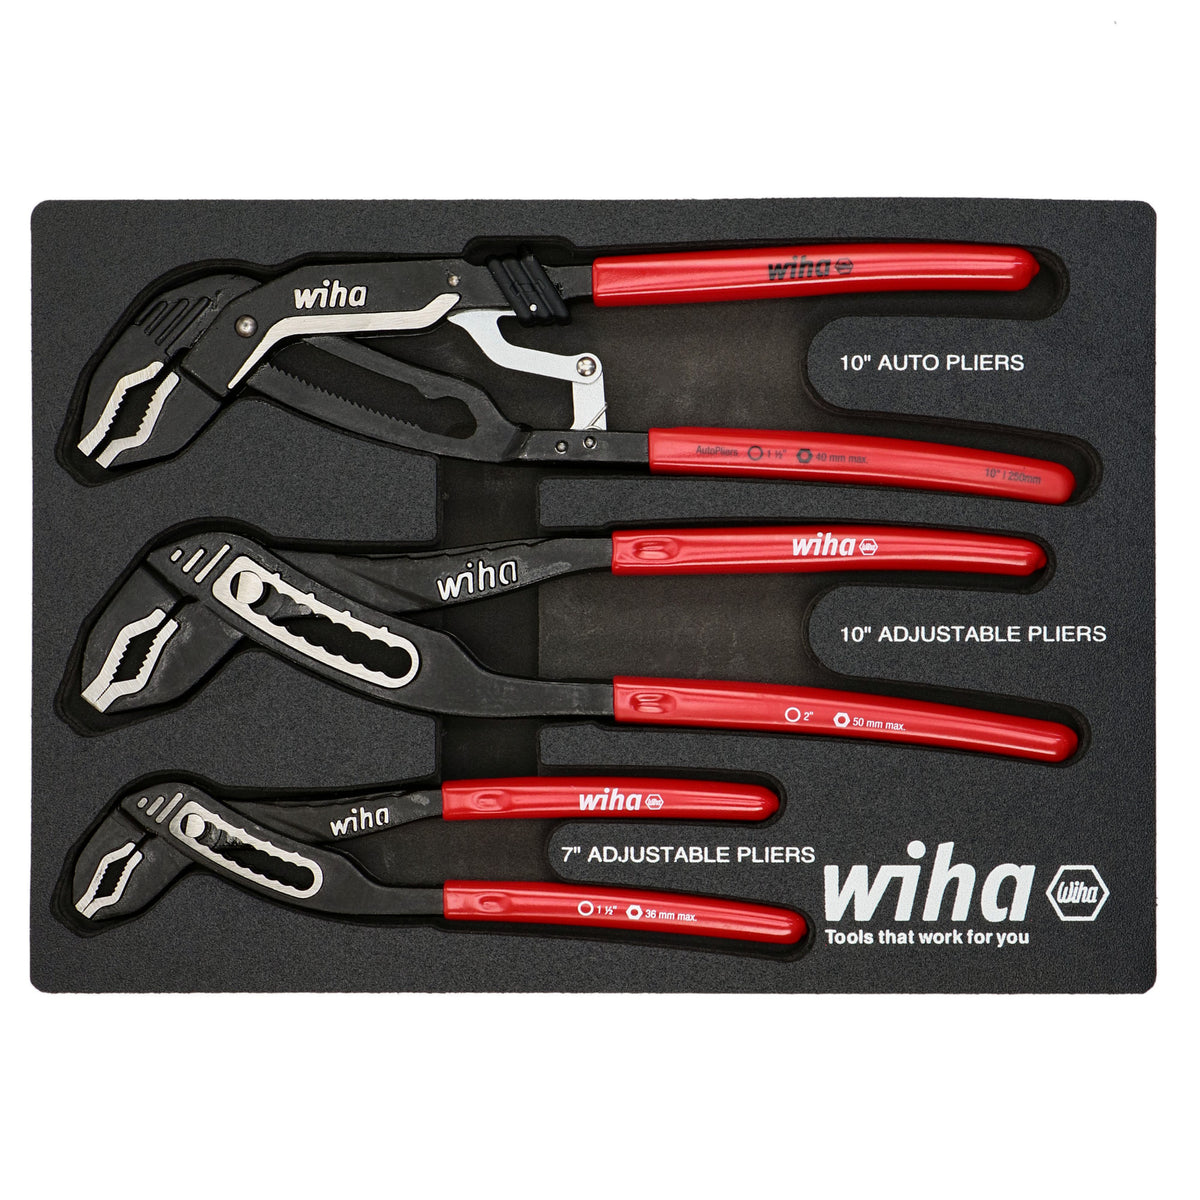 Wiha 34681 - 4 Piece Classic Grip Pliers and Cutters Tray Set